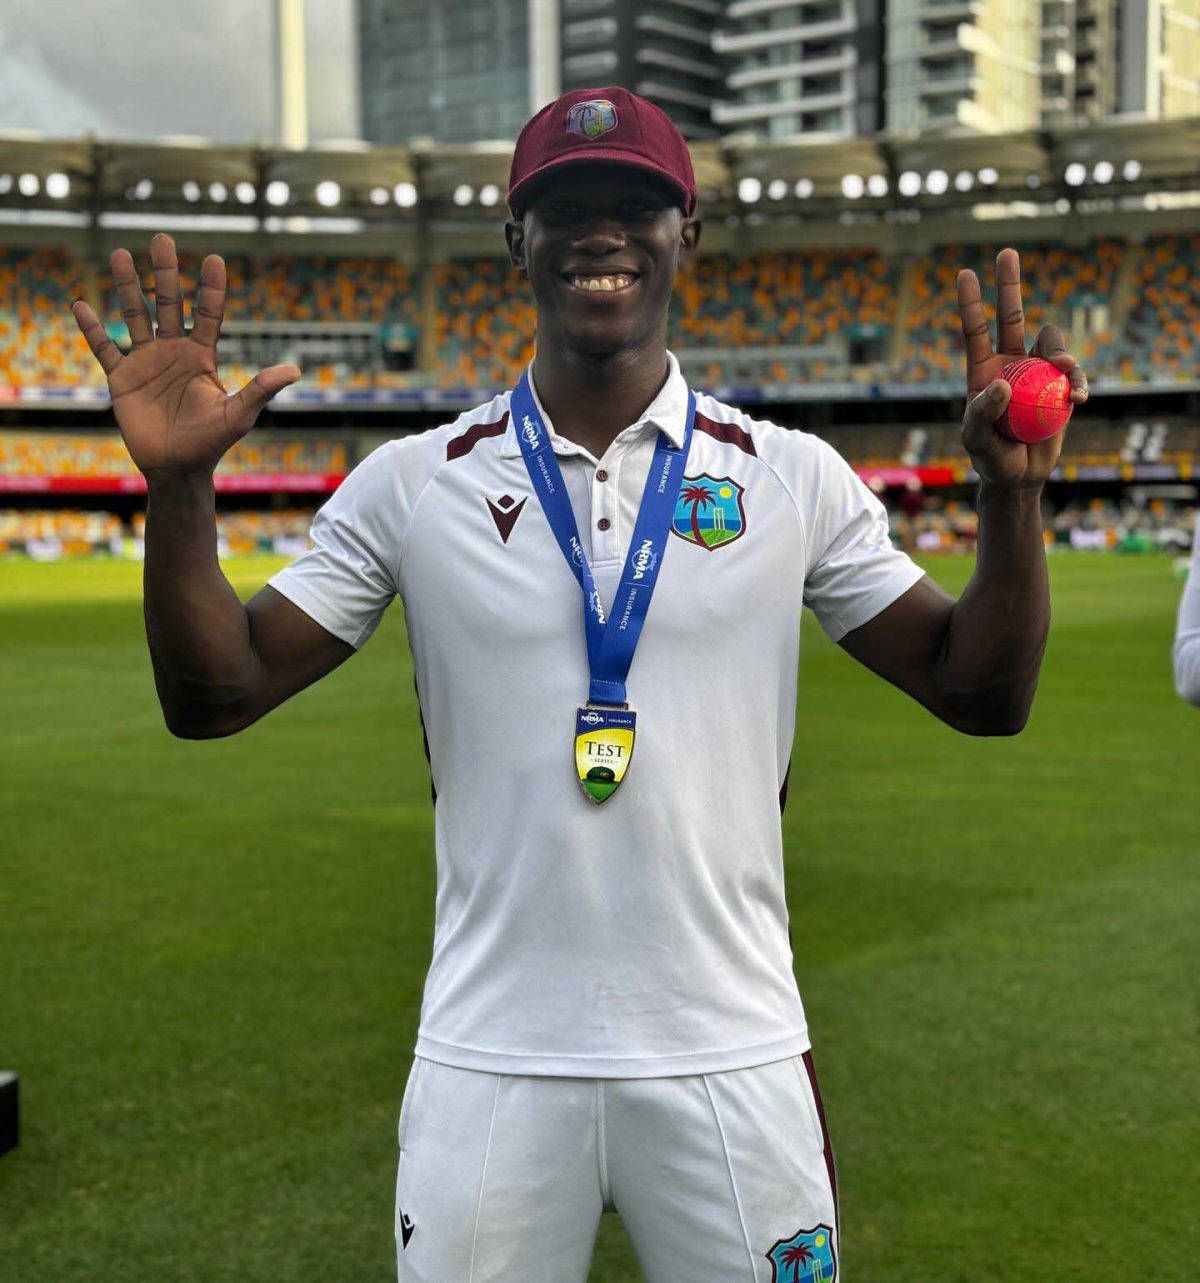 Guyanese Shamar Jospeh holds up seven fingers representing the seven wickets took yesterday morning as the West Indies completed an incredible victory against the best test team in the world, Australia. It was the first time in 27 years the Caribbean side won a test match in Australia and the victory was sweeter that Jospeh, playing in just his second match, played the leading role.   (West Indies Cricket photo)